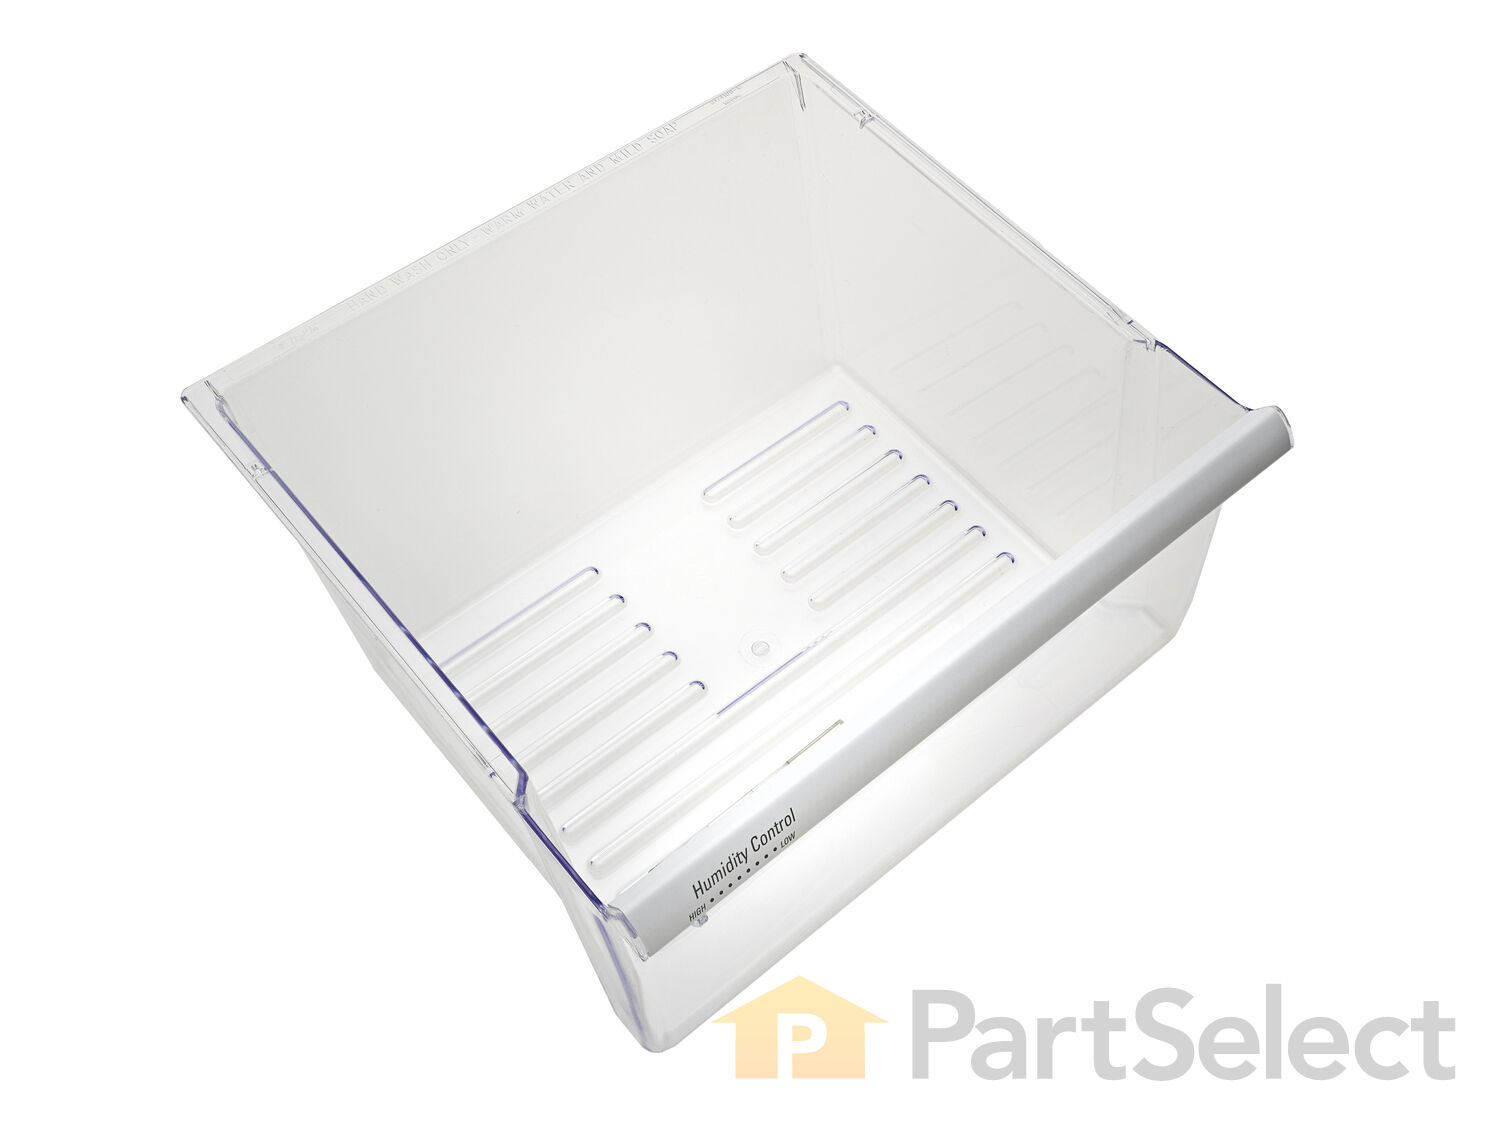 Refrigerator Crisper Drawer with Humidity Control WP2188656 Official